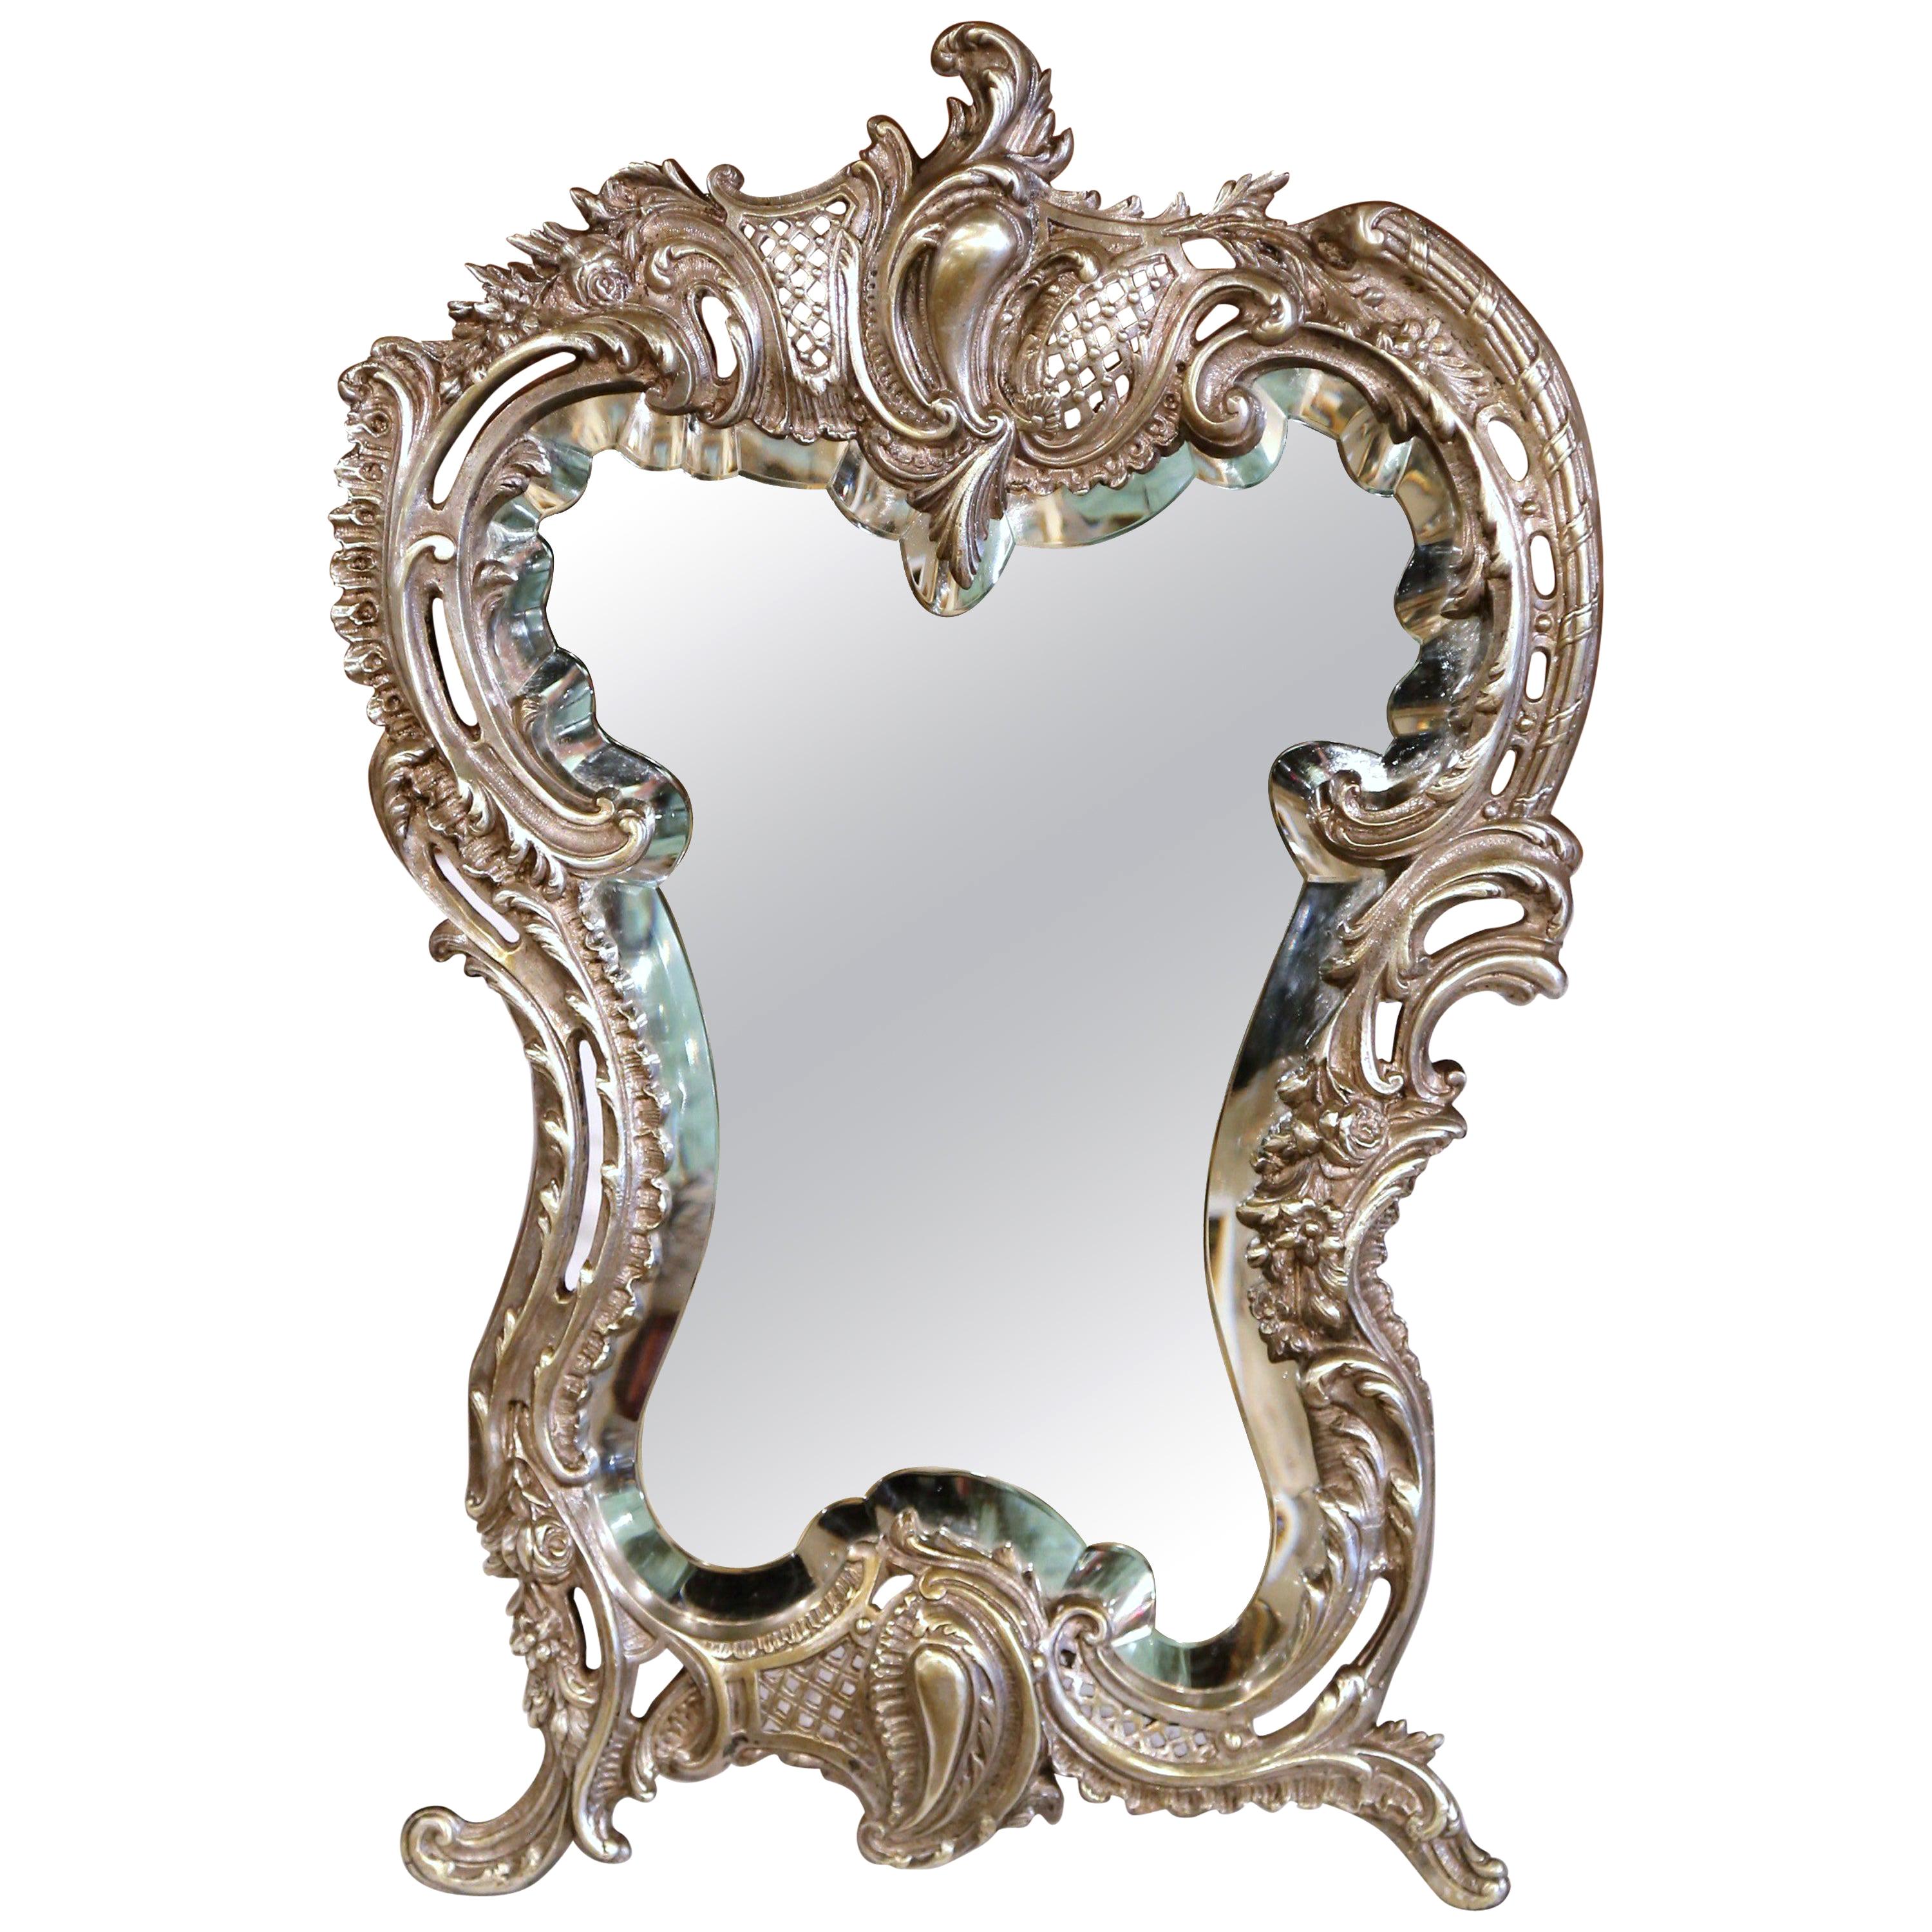 Decorate your master bath counter with this elegant antique dressing mirror. Crafted in France, circa 1870, the freestanding table mirror with the original beveled mercury glass, features a centered ornate cartouche, embellished with scrolled floral